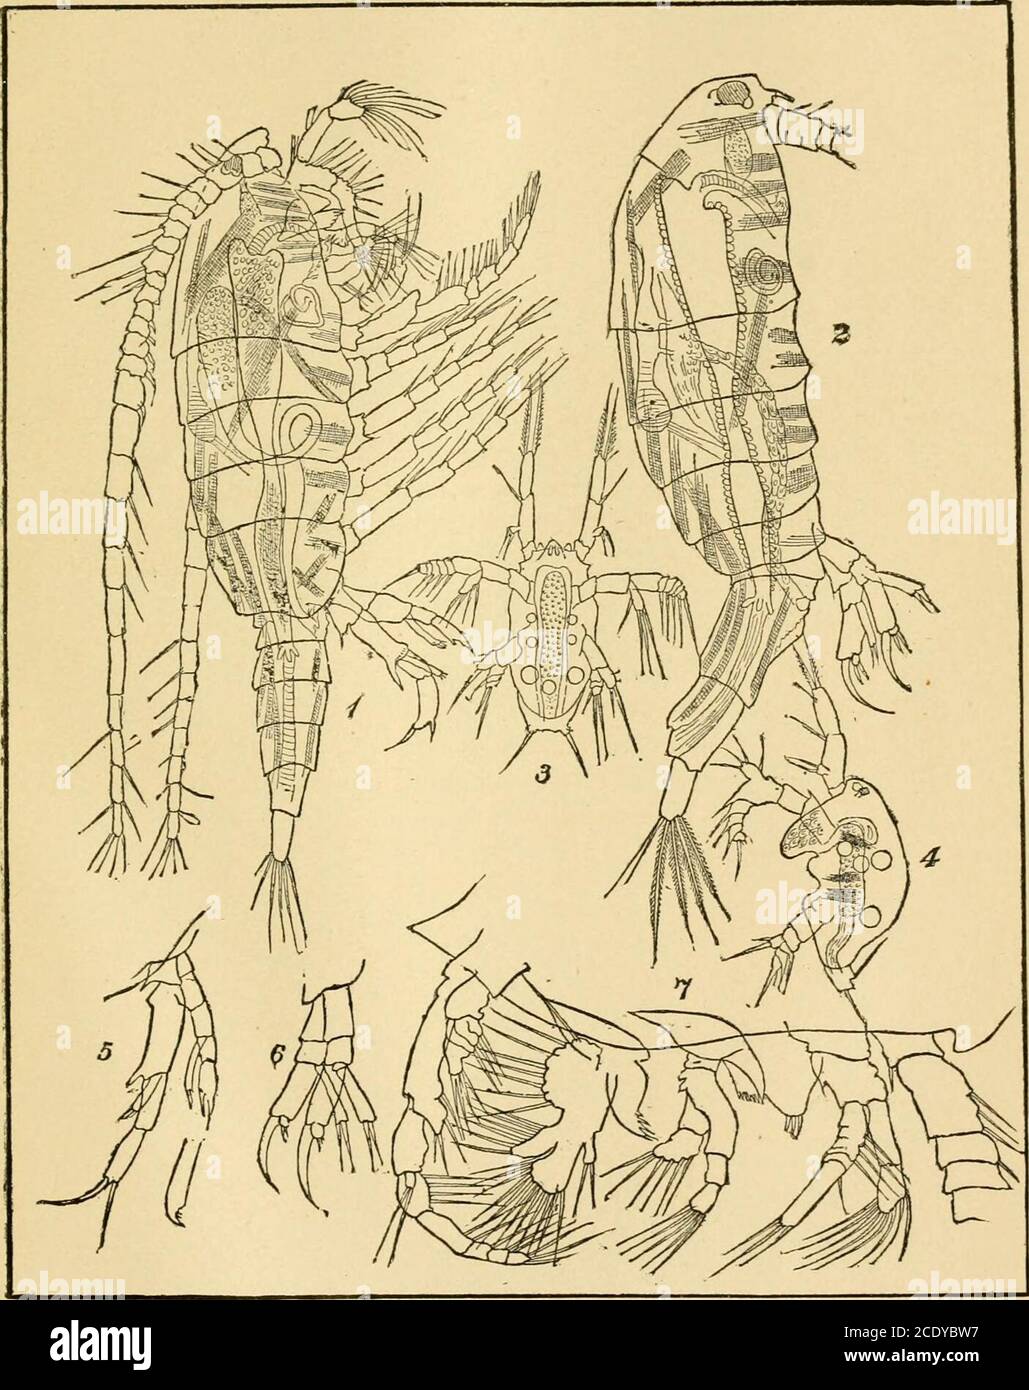 . A final report on the Crustacea of Minnesota, included in the orders Cladocera and Copepoda, together with a synopsis of the described species in North America, and keys to the known species of the more important genera . PLATE Q1 . Fig. 1. Diaptomus sp. Young male; external parts as yet butpartly developed showing alimentary and reproductivesystems as well as a portion of the muscular system.The looped tube is the vas deferens. The small irreg-ularly coiled tube anteriorly is the shell-gland orkidney. Fig. 2. female with ovary, oviducts and heart. Figs. 3-4. Nauplius larva of same. Figs. 5- Stock Photo